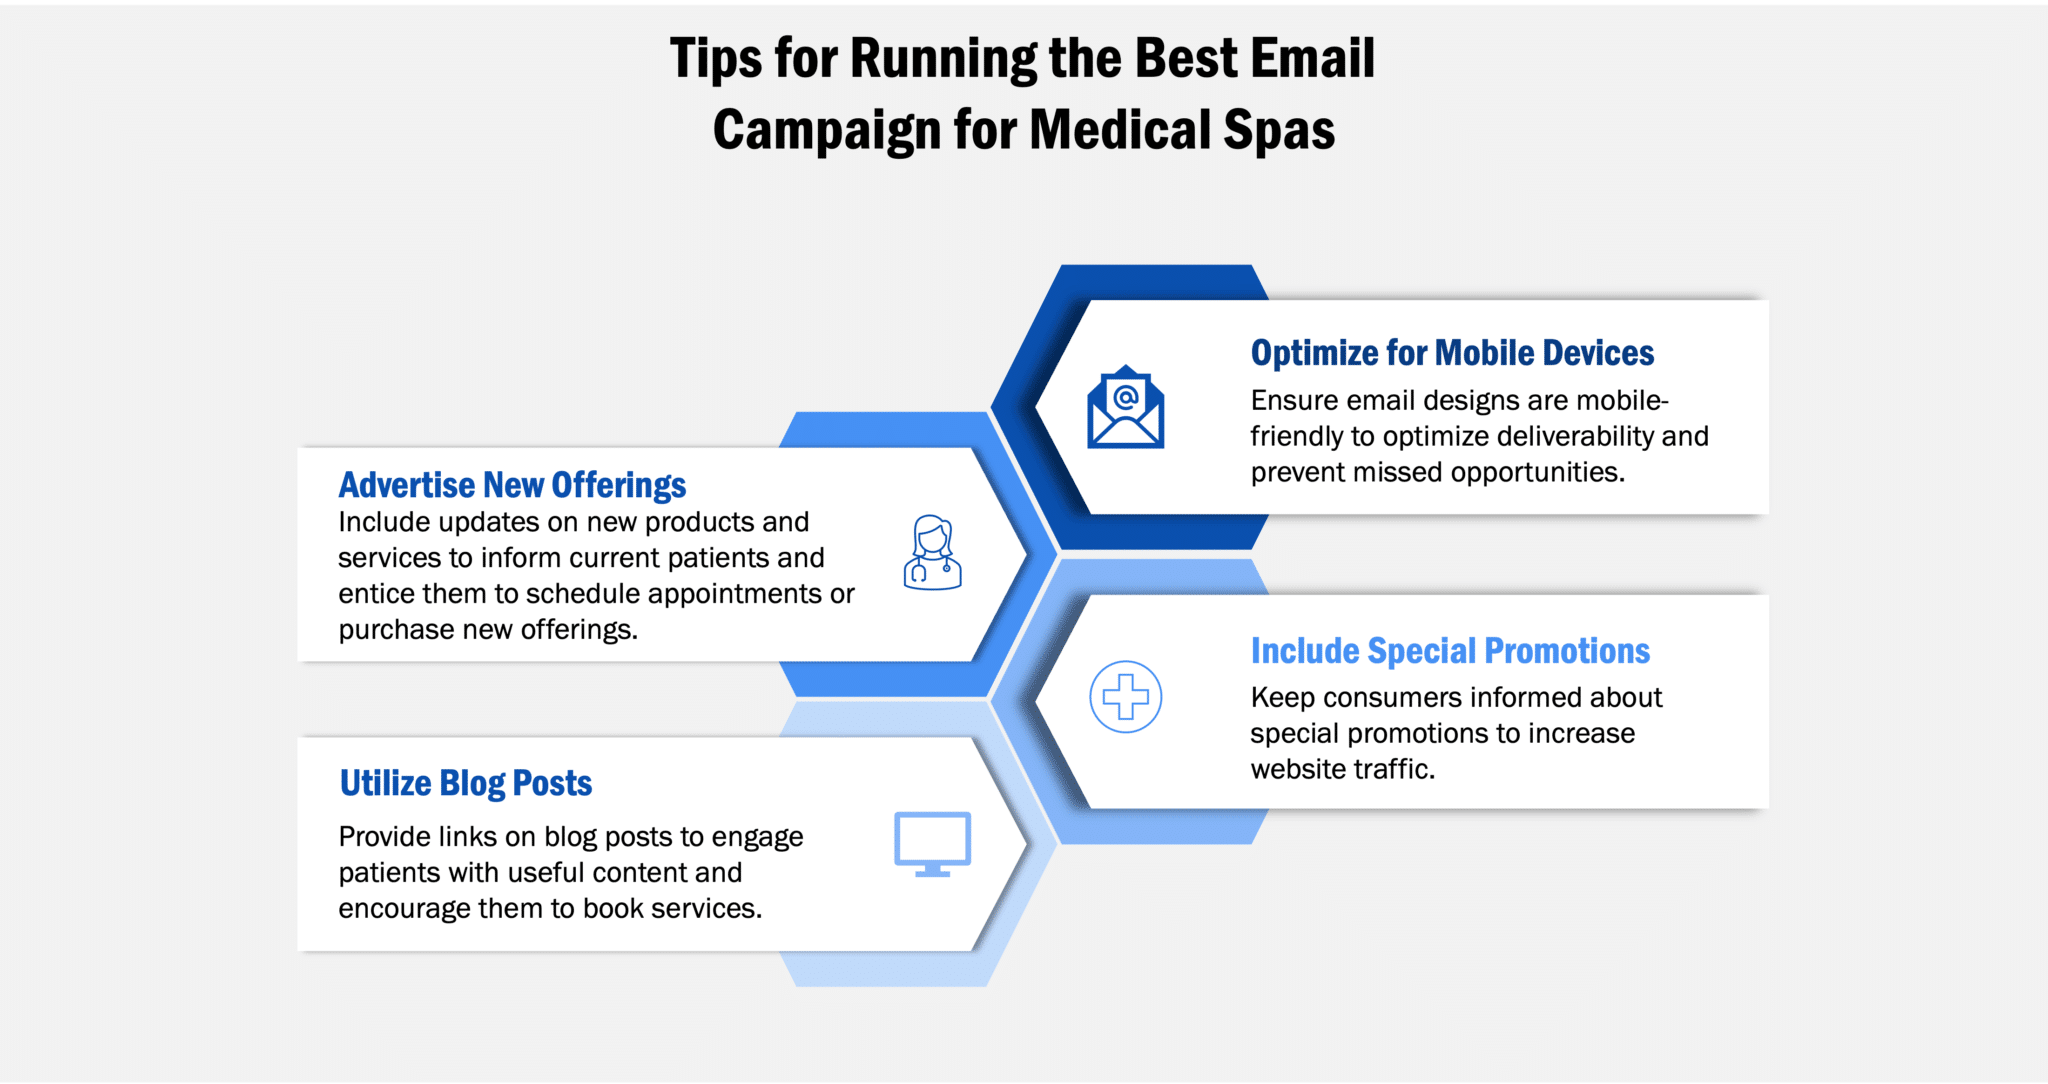 learn the tips and tricks to running the best email marketing campaign for your medical spa